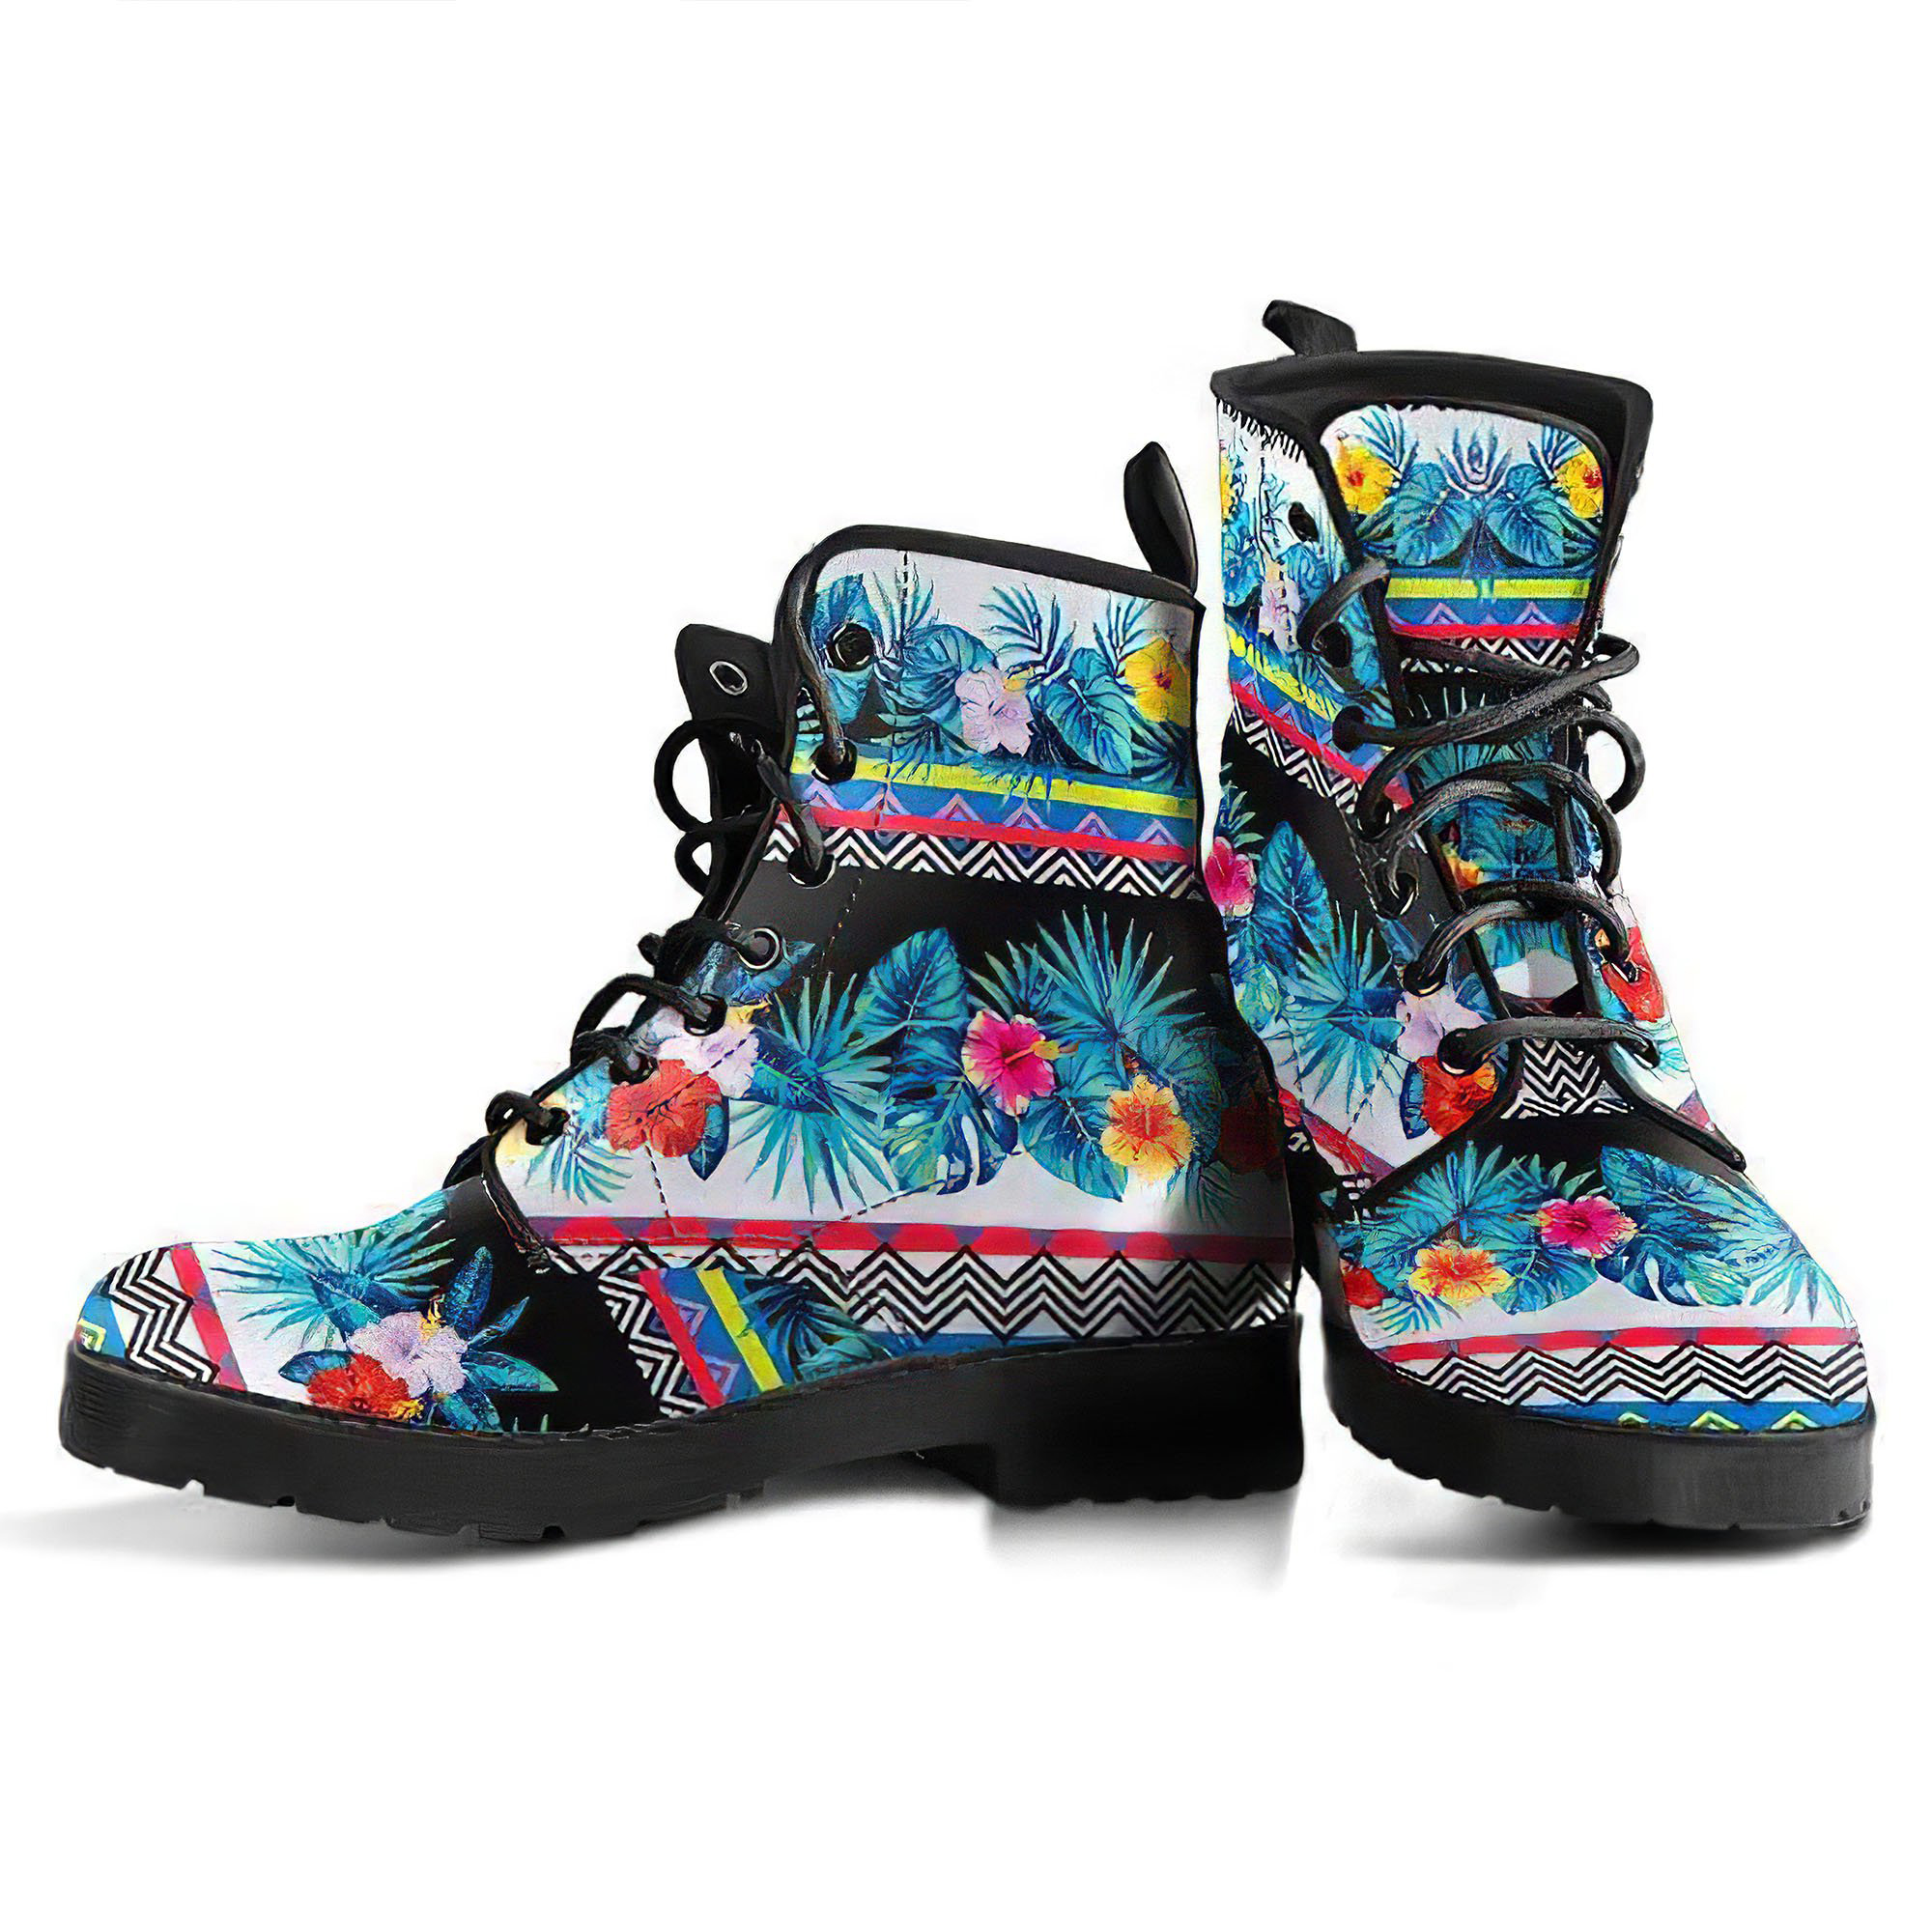 boho-floral-2-handcrafted-boots-gp-main.jpg